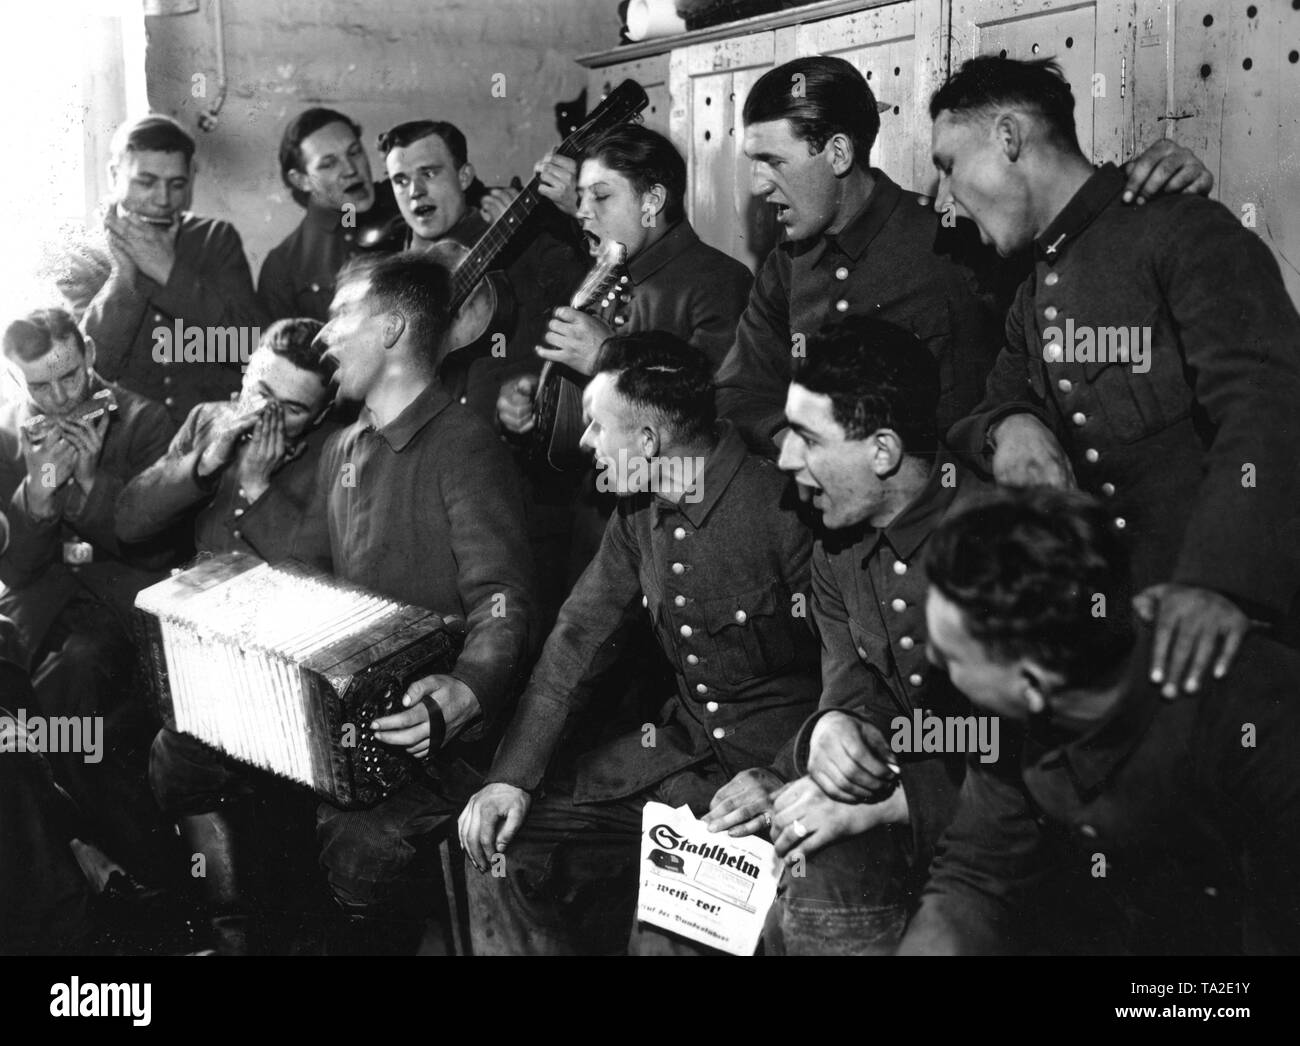 Men of the Volunteer Work Service of the Stahlhelm are singing and playing music after work done presumably for the new Reichsforschungsiedlung Haselhorst in Berlin. Stock Photo